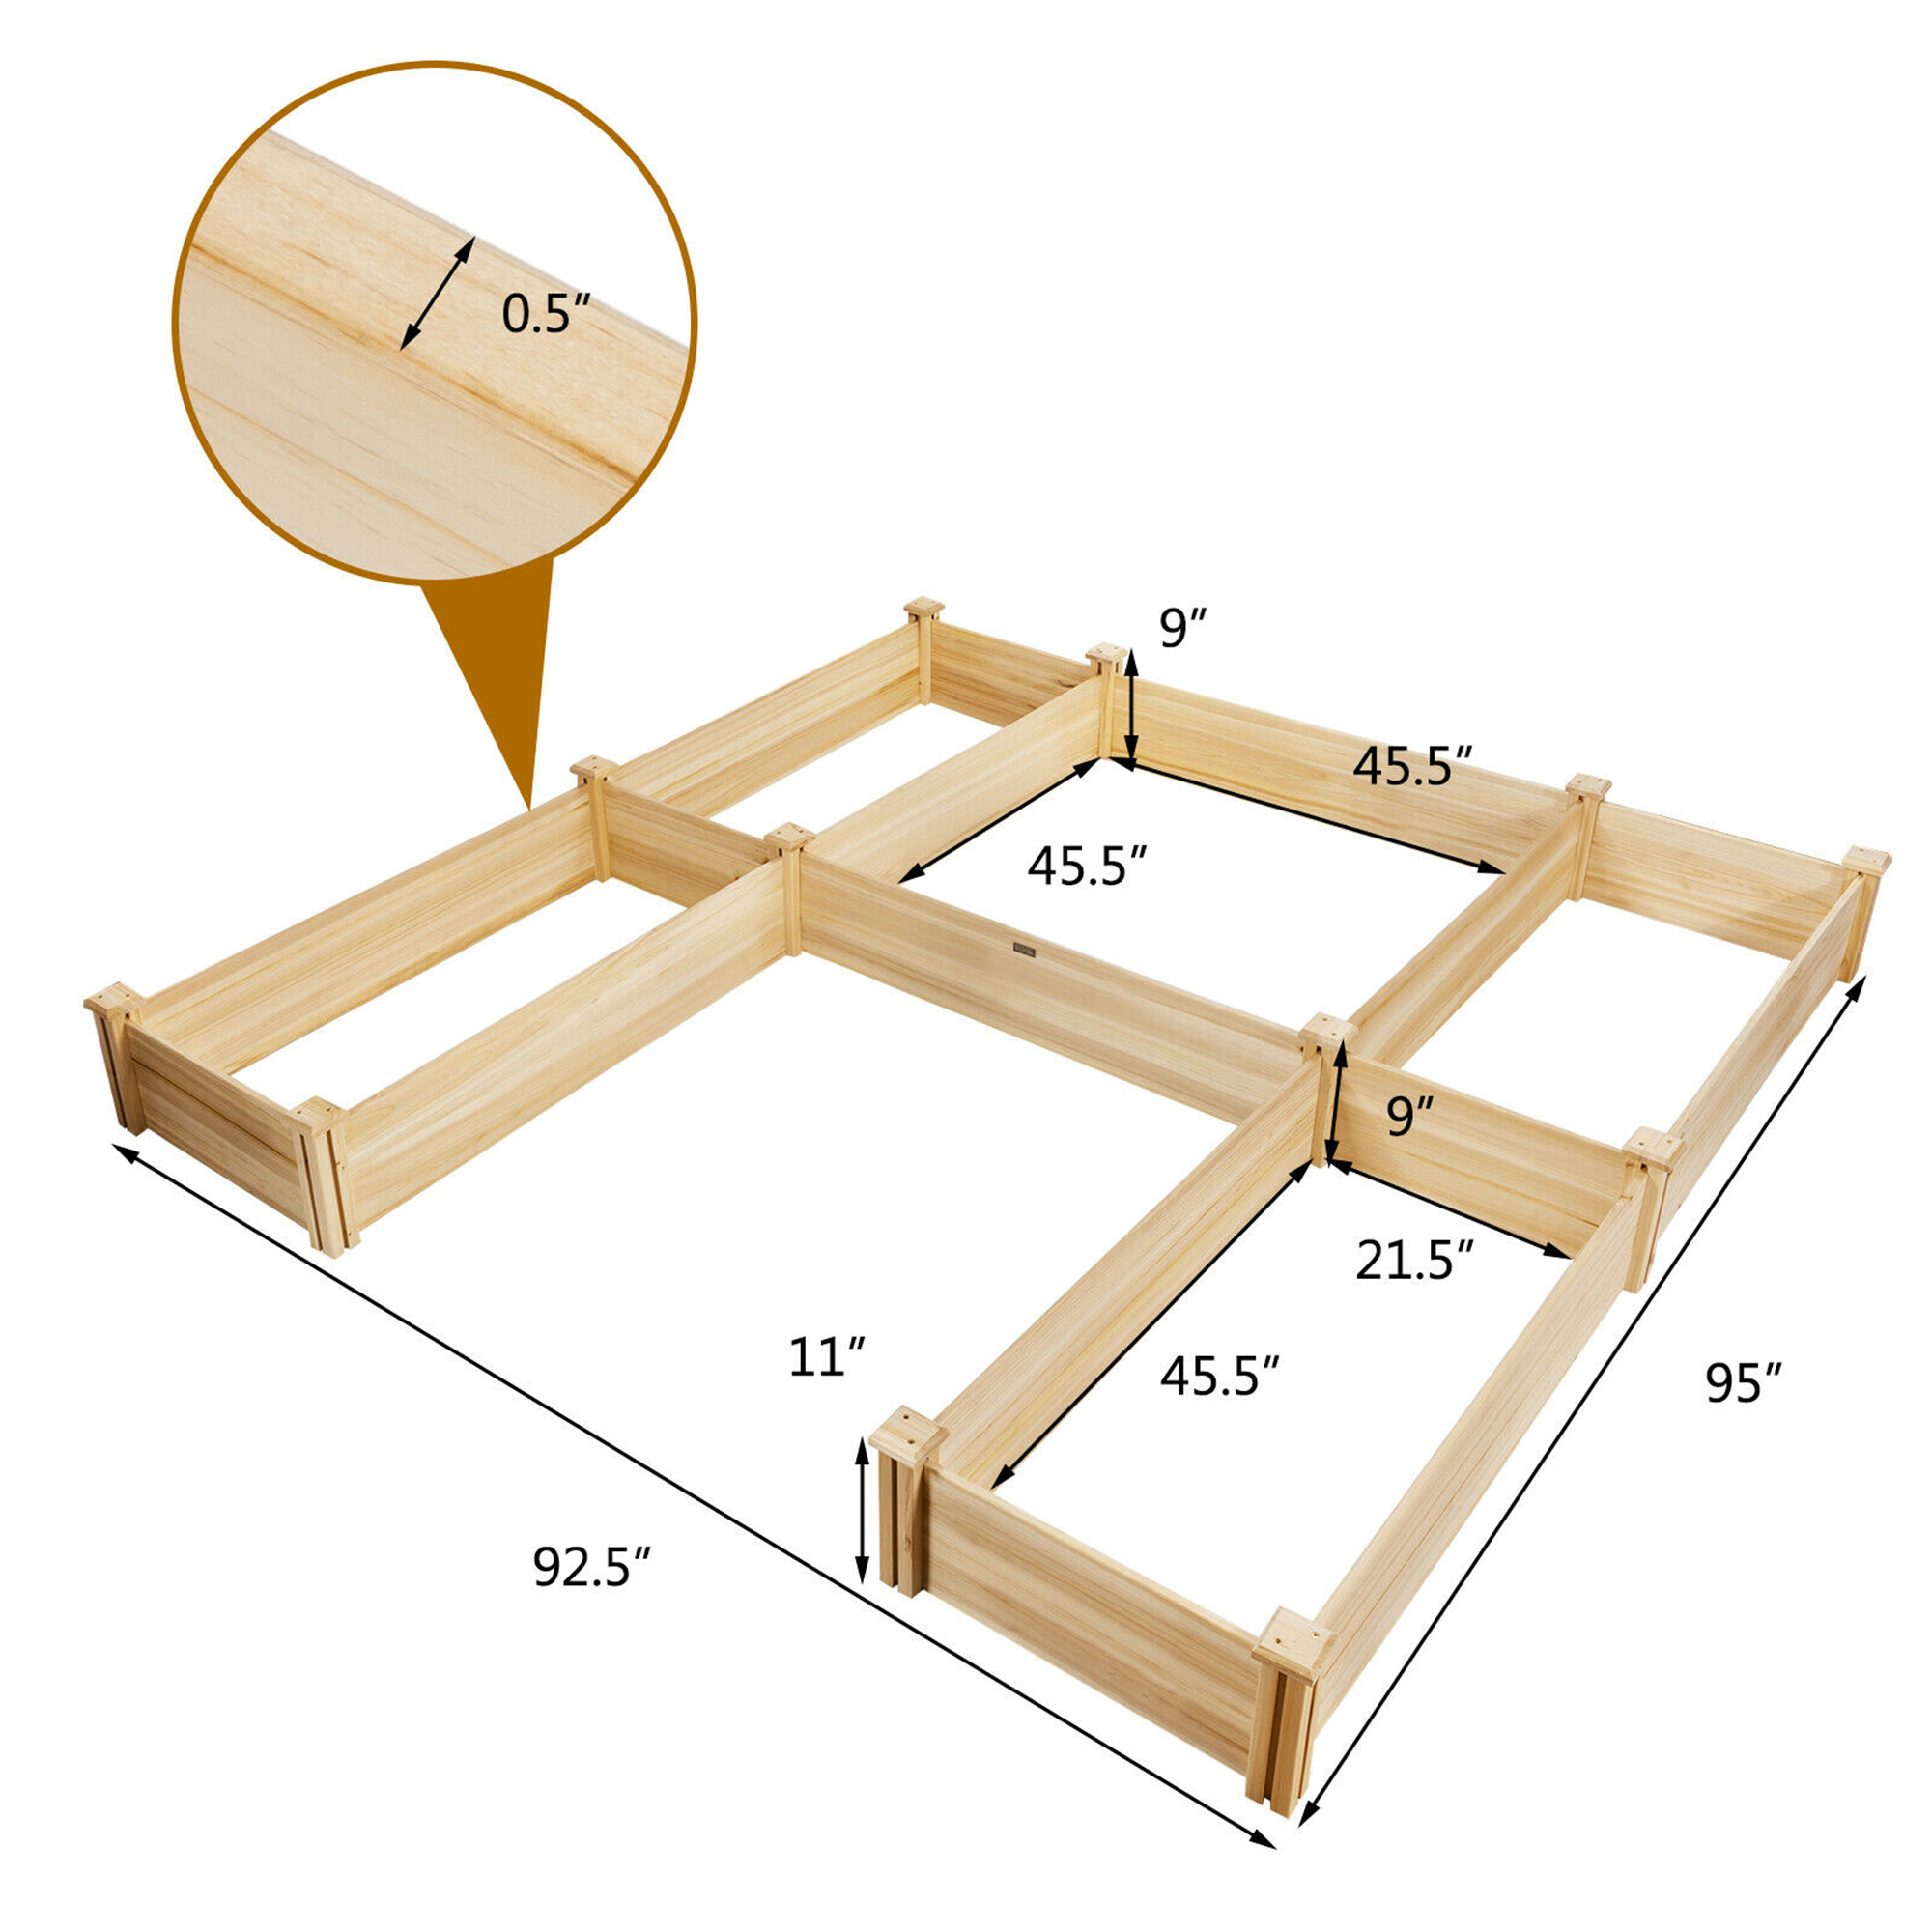 Gymax Raised Garden Bed 92.5x95x11in Wooden Garden Box Planter Container U-Shaped Bed - image 2 of 10